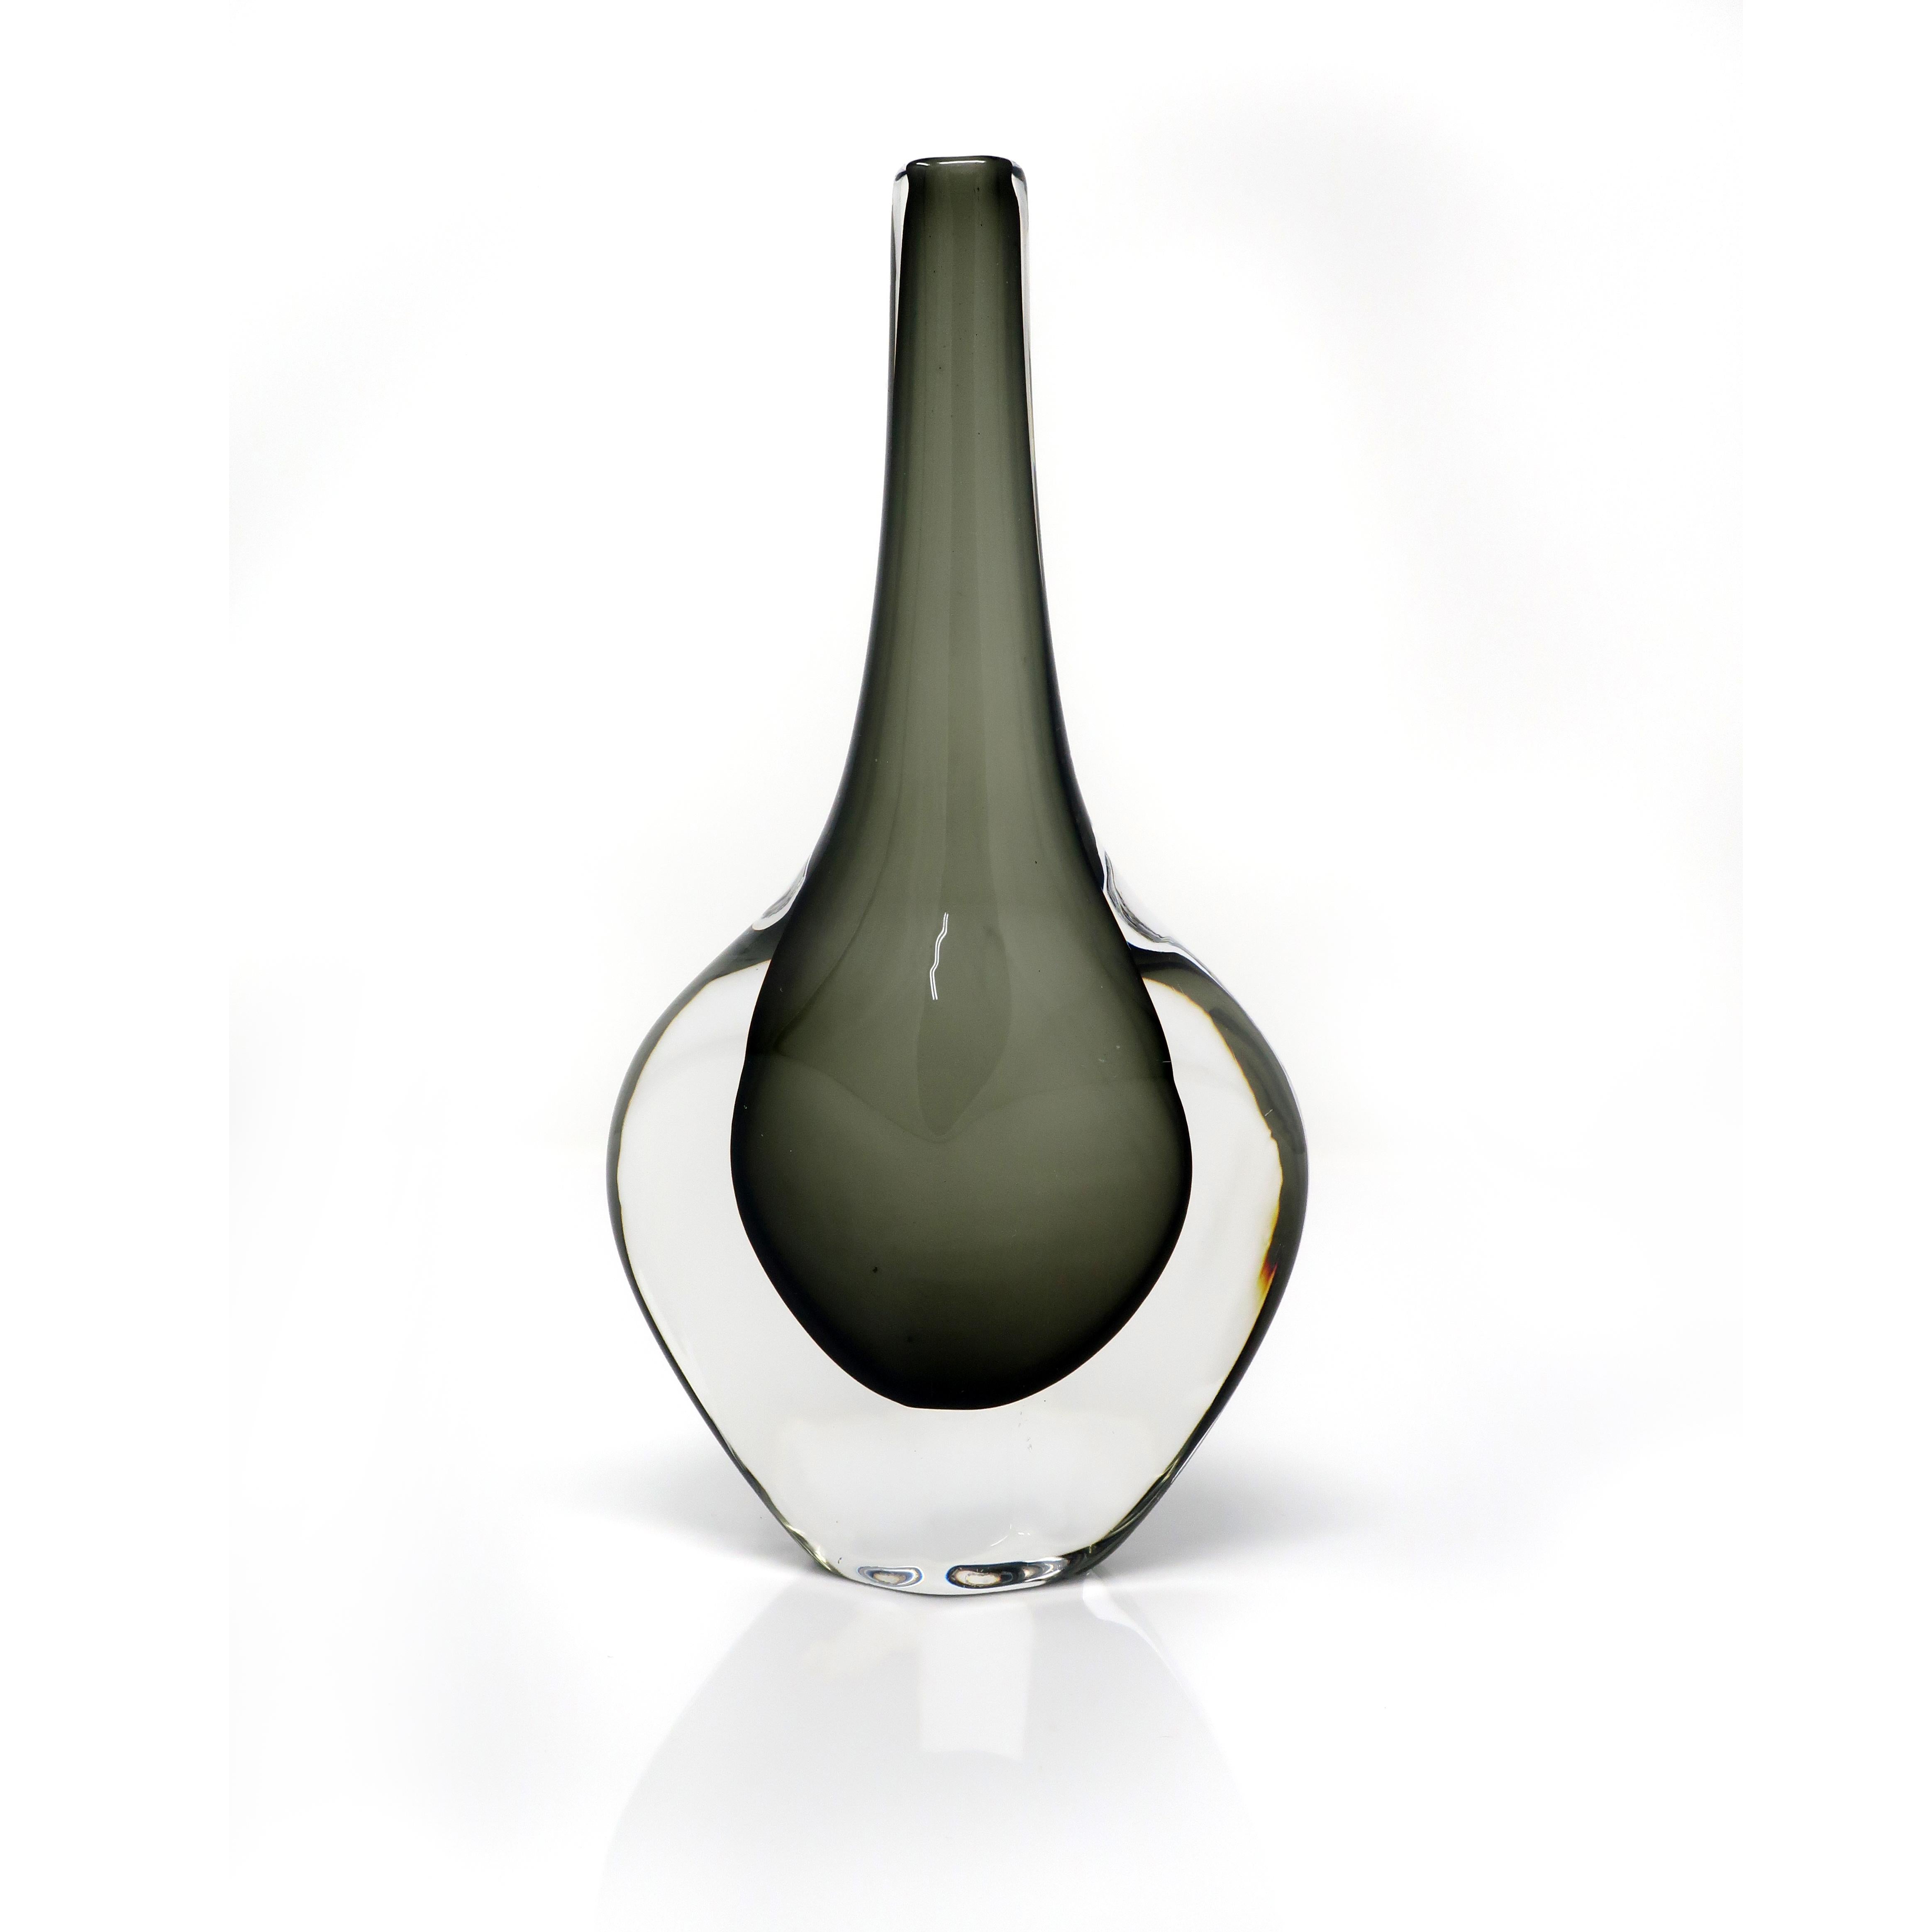 A Sommerso glass vase designed by Nils Landberg for Orrefors. Showcases beautifully with a Smokey green interior enveloped by an outer translucent layer that creates an almost floating appearance. Has a perfect slender stem on a wide base.

Signed